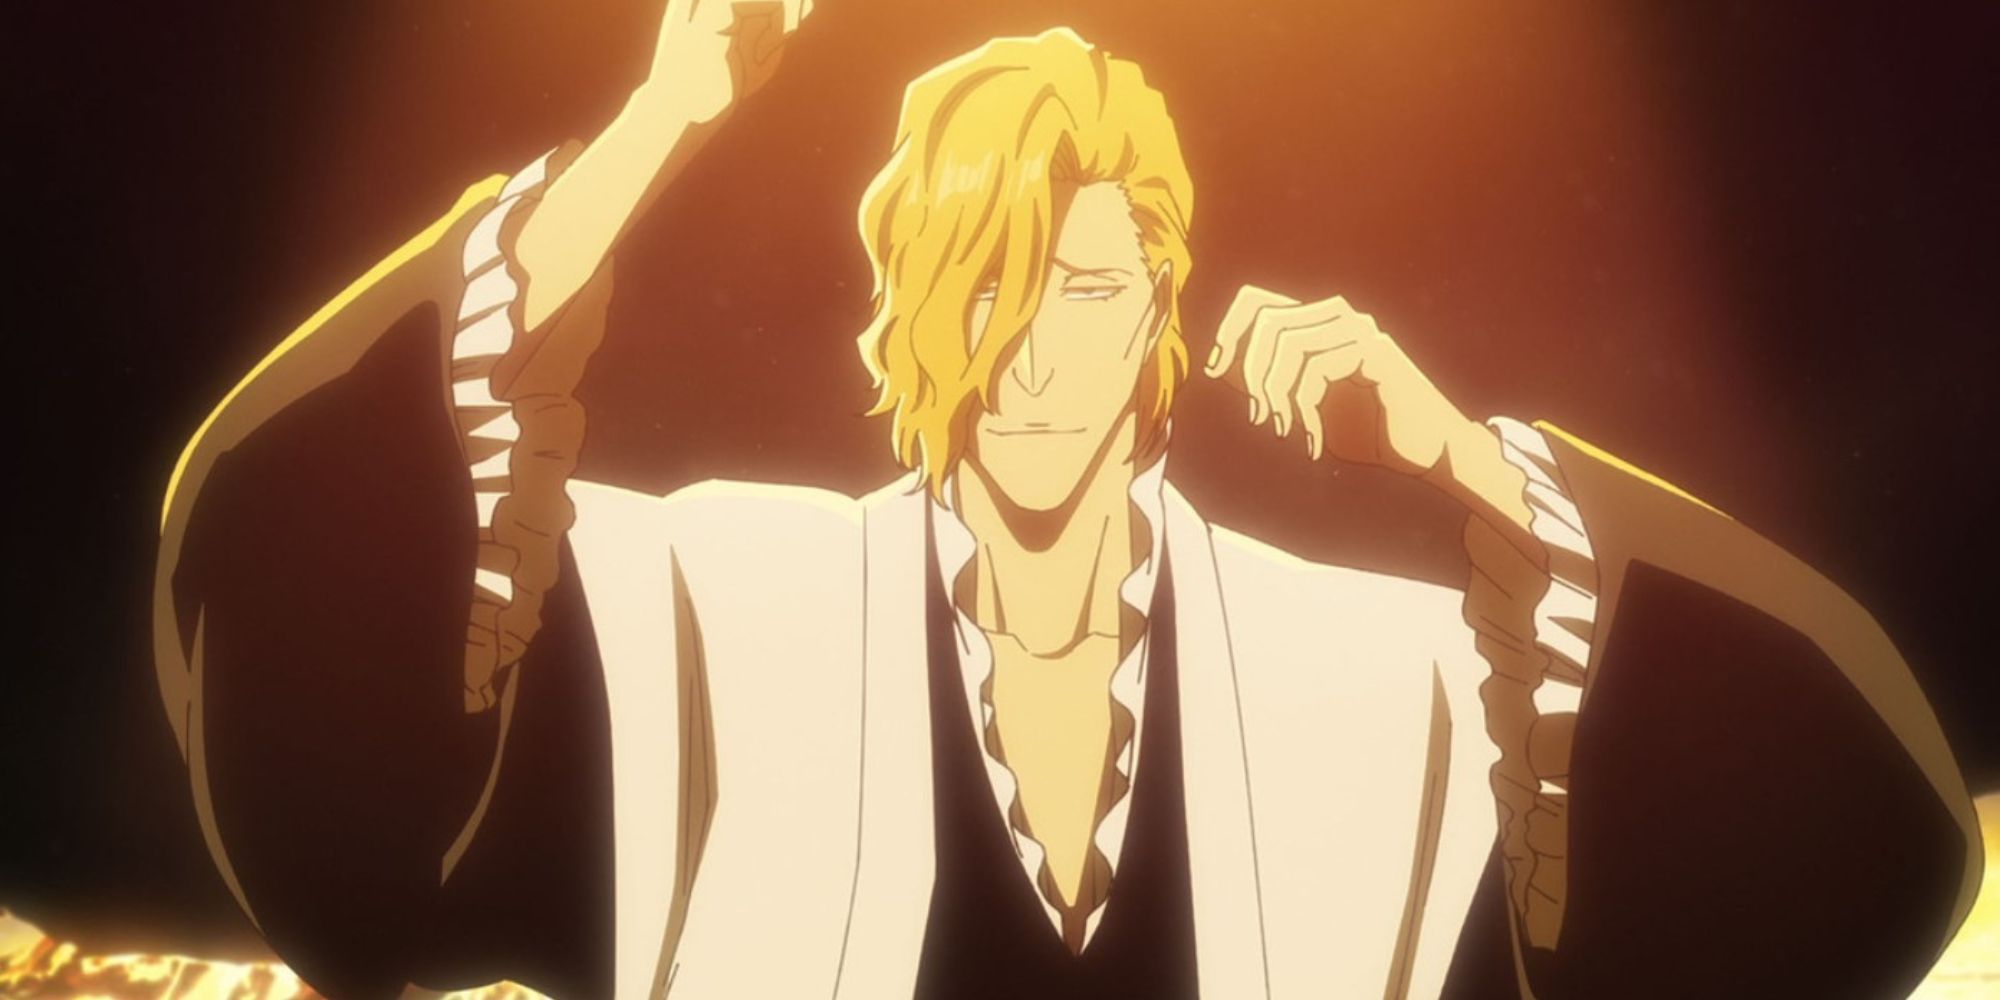 Bleach TYBW Part 2 Episode 2 release date, time: When and where